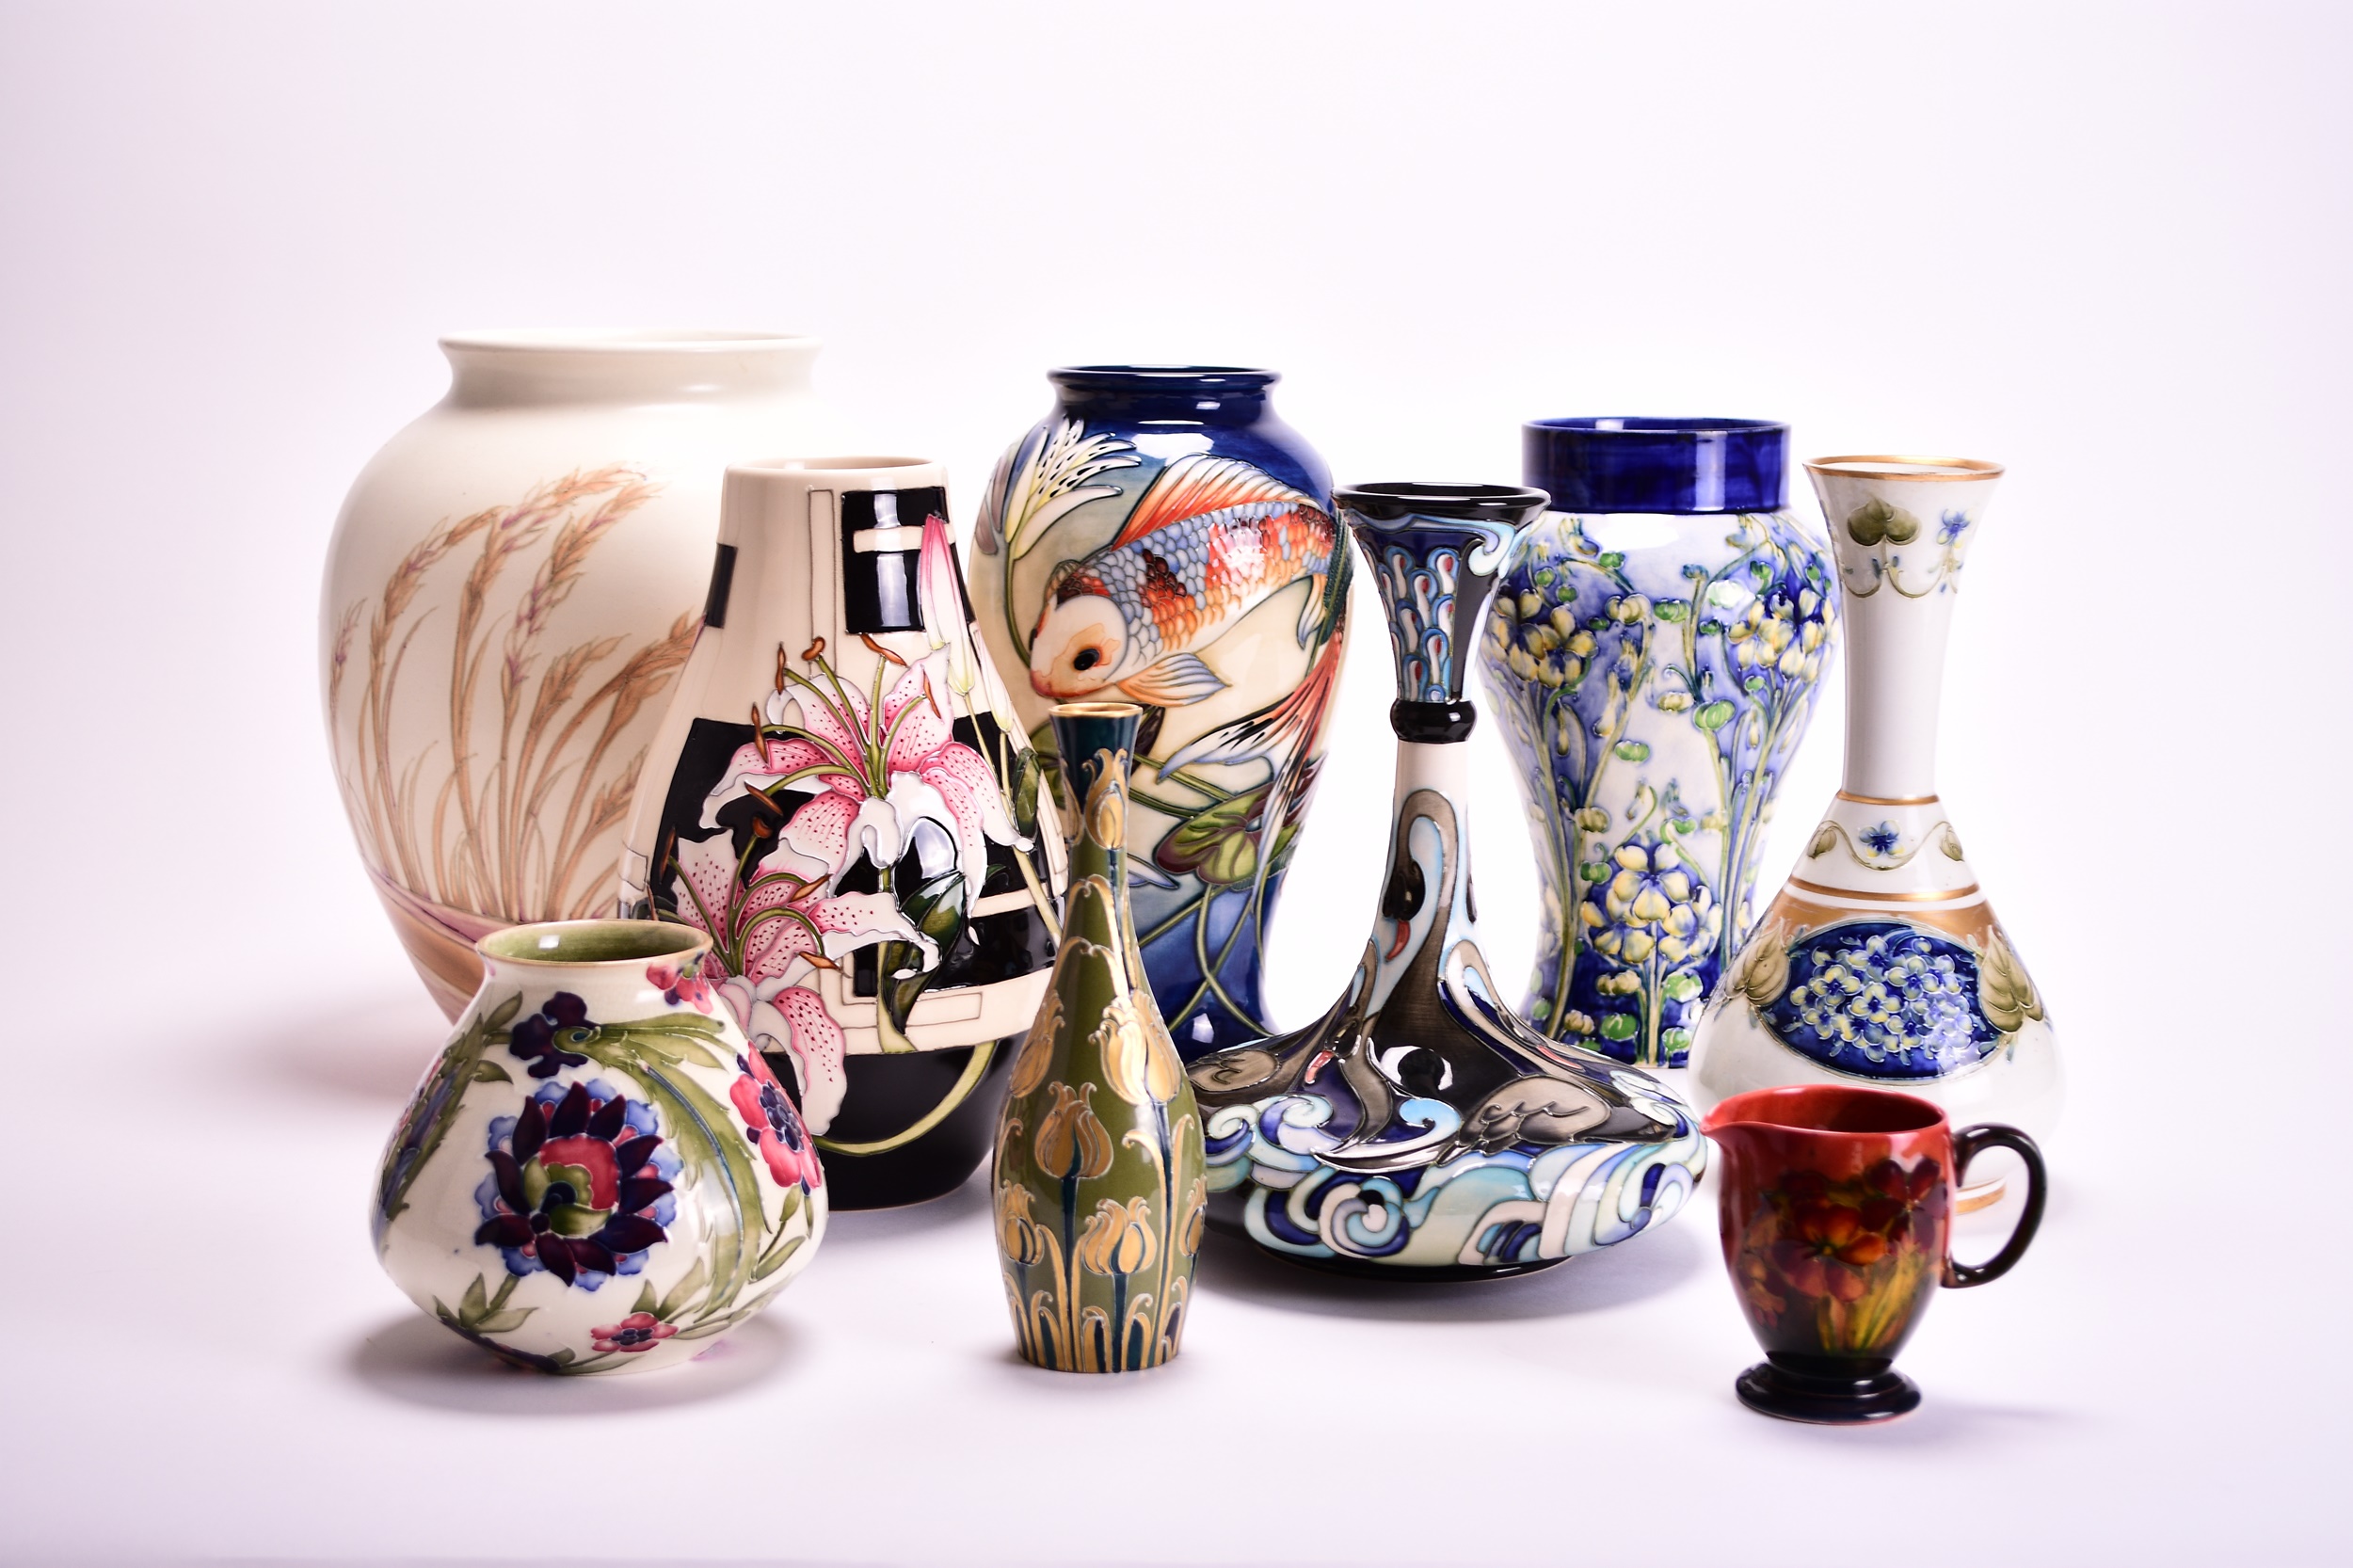 Pictures, Ceramics, Collectables and Modern Design